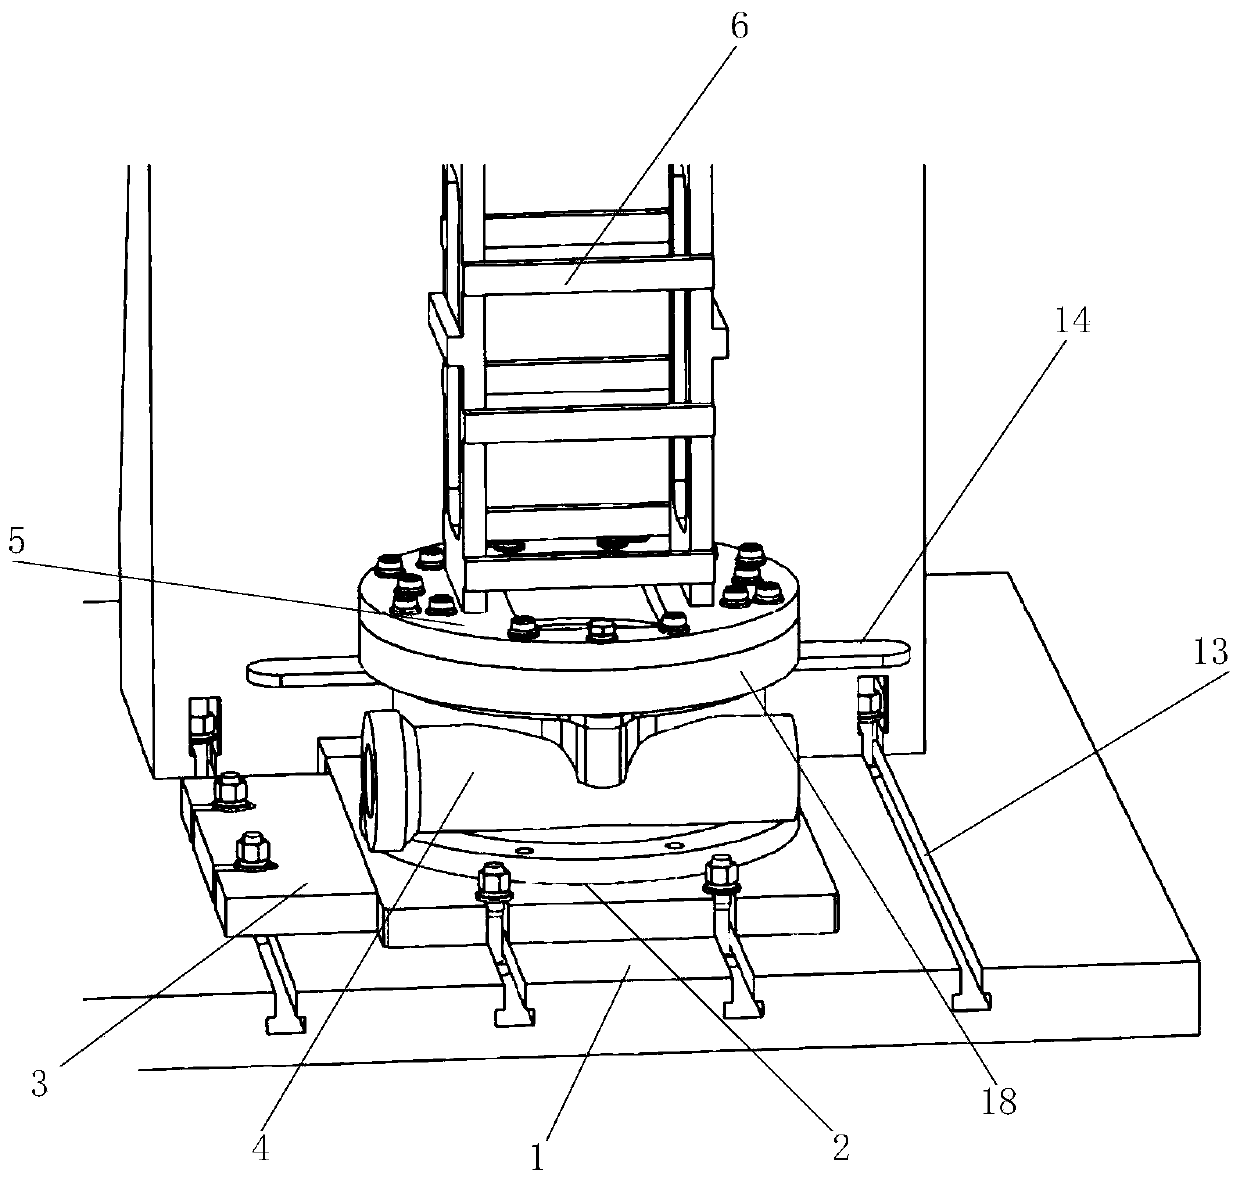 A rigidity detection device for a rotary reducer